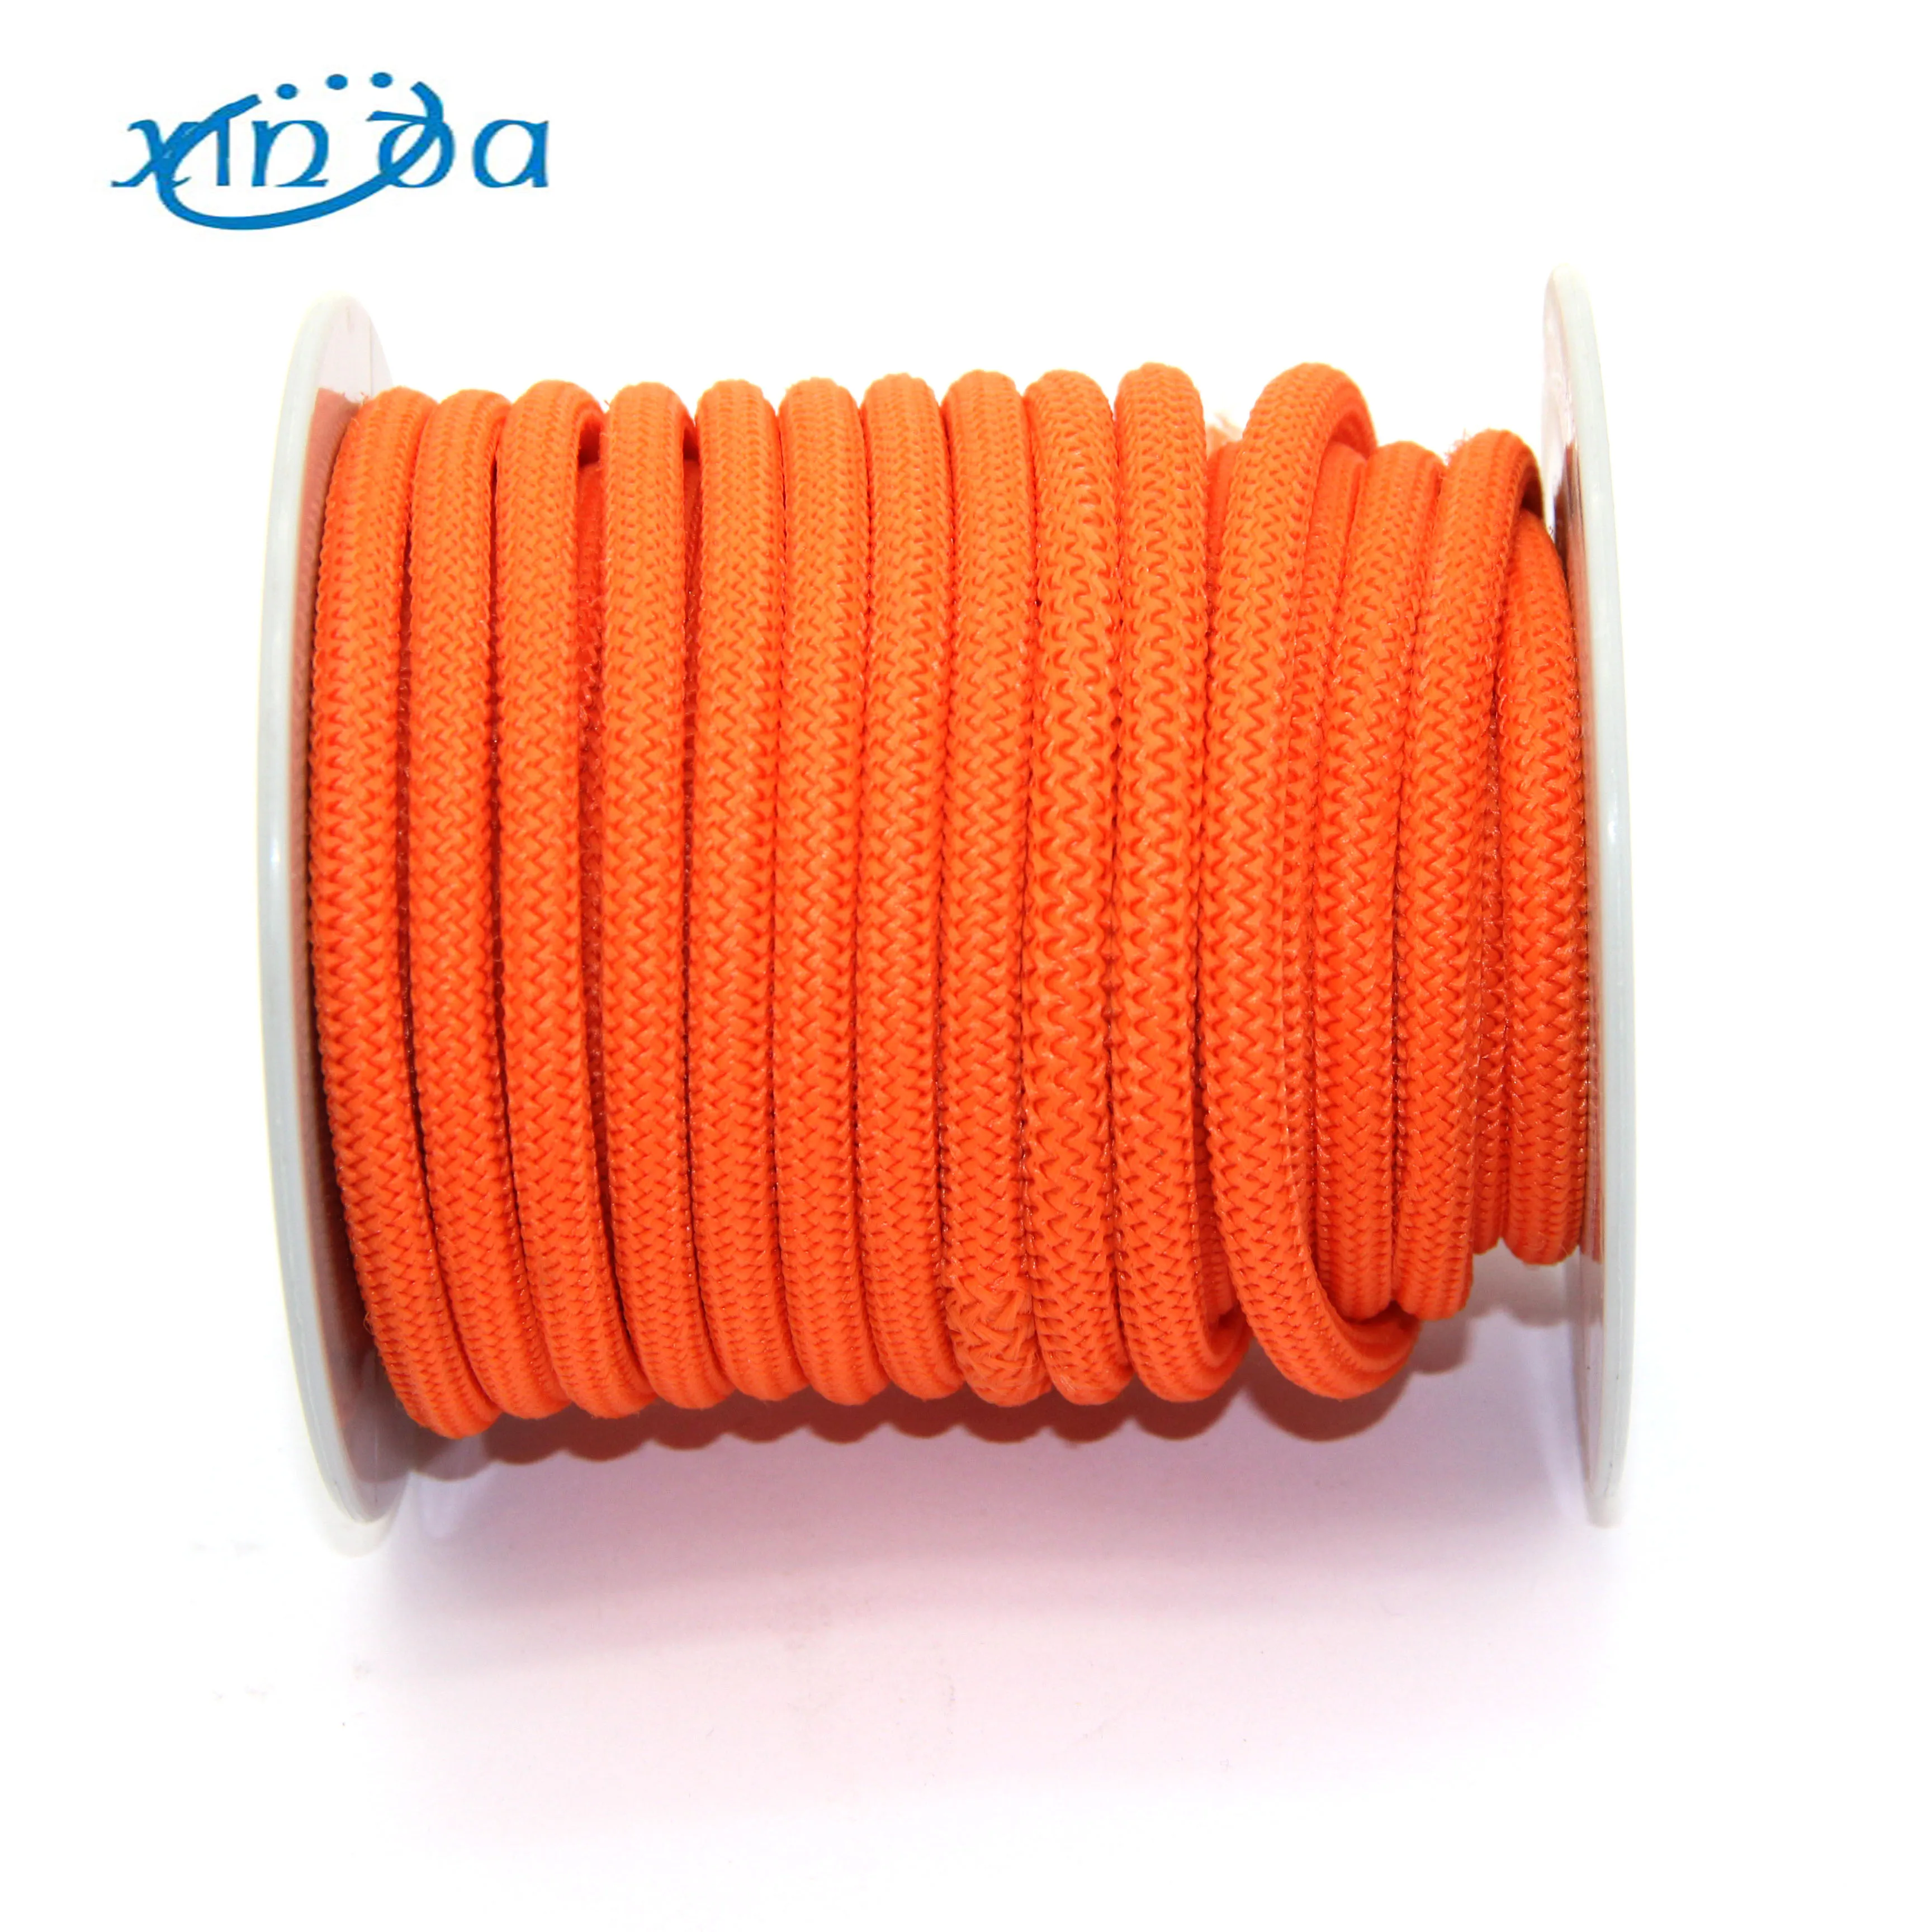 braided polyester rope